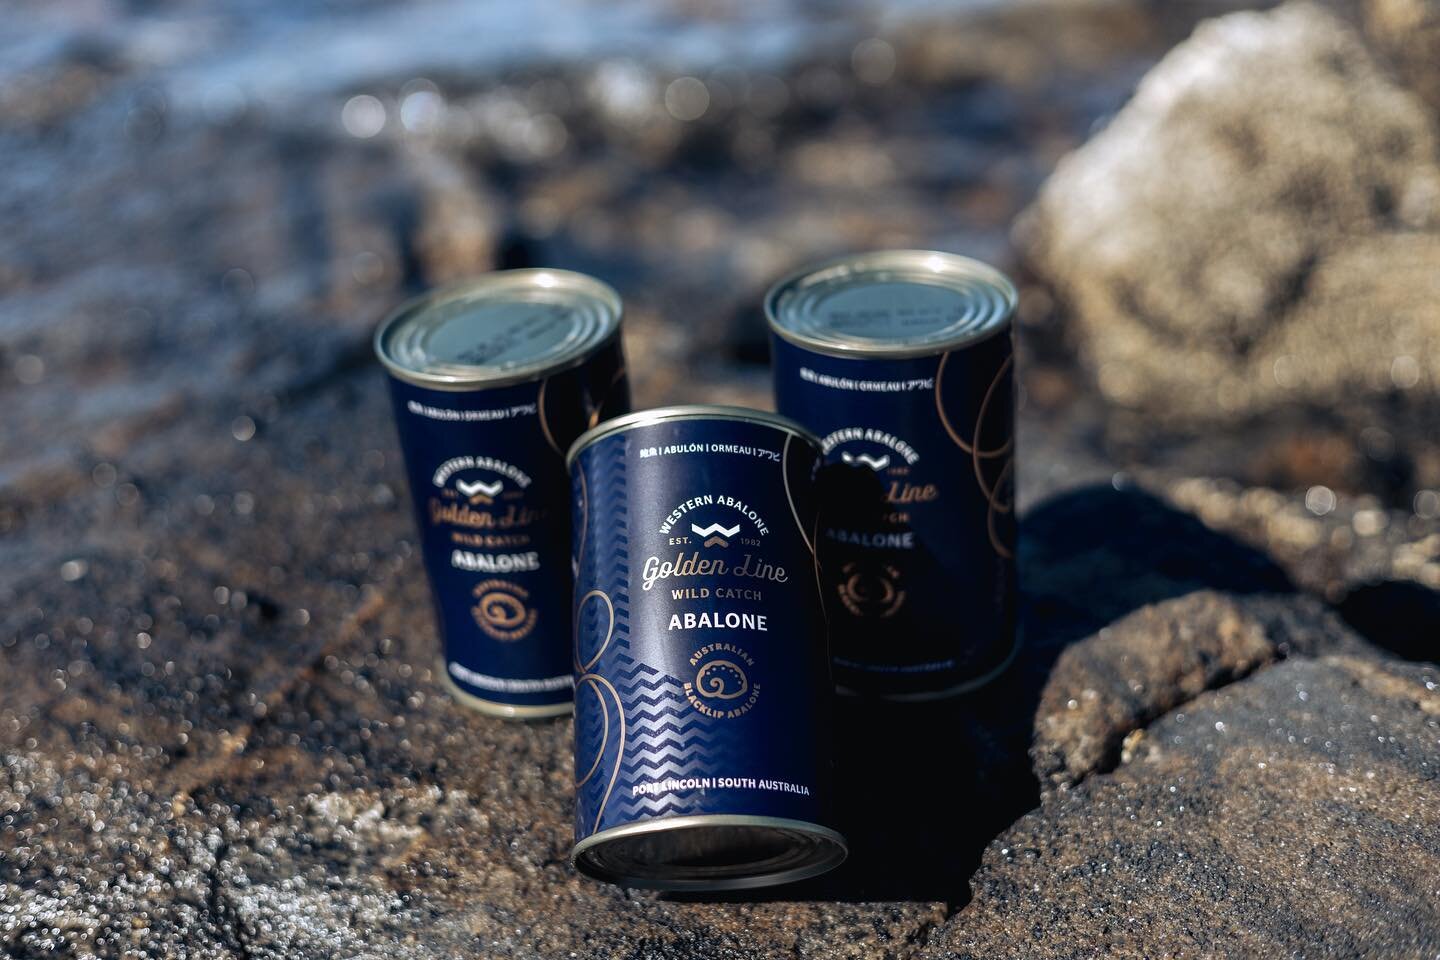 Did you know you can now shop our range of Golden Line canned wild-catch blacklip abalone?

All you need to do is follow the link in our bio to browse our range of can sizes 😊

#australianwildcatch #blacklipabalone #cannedabalone #westernabalone #au